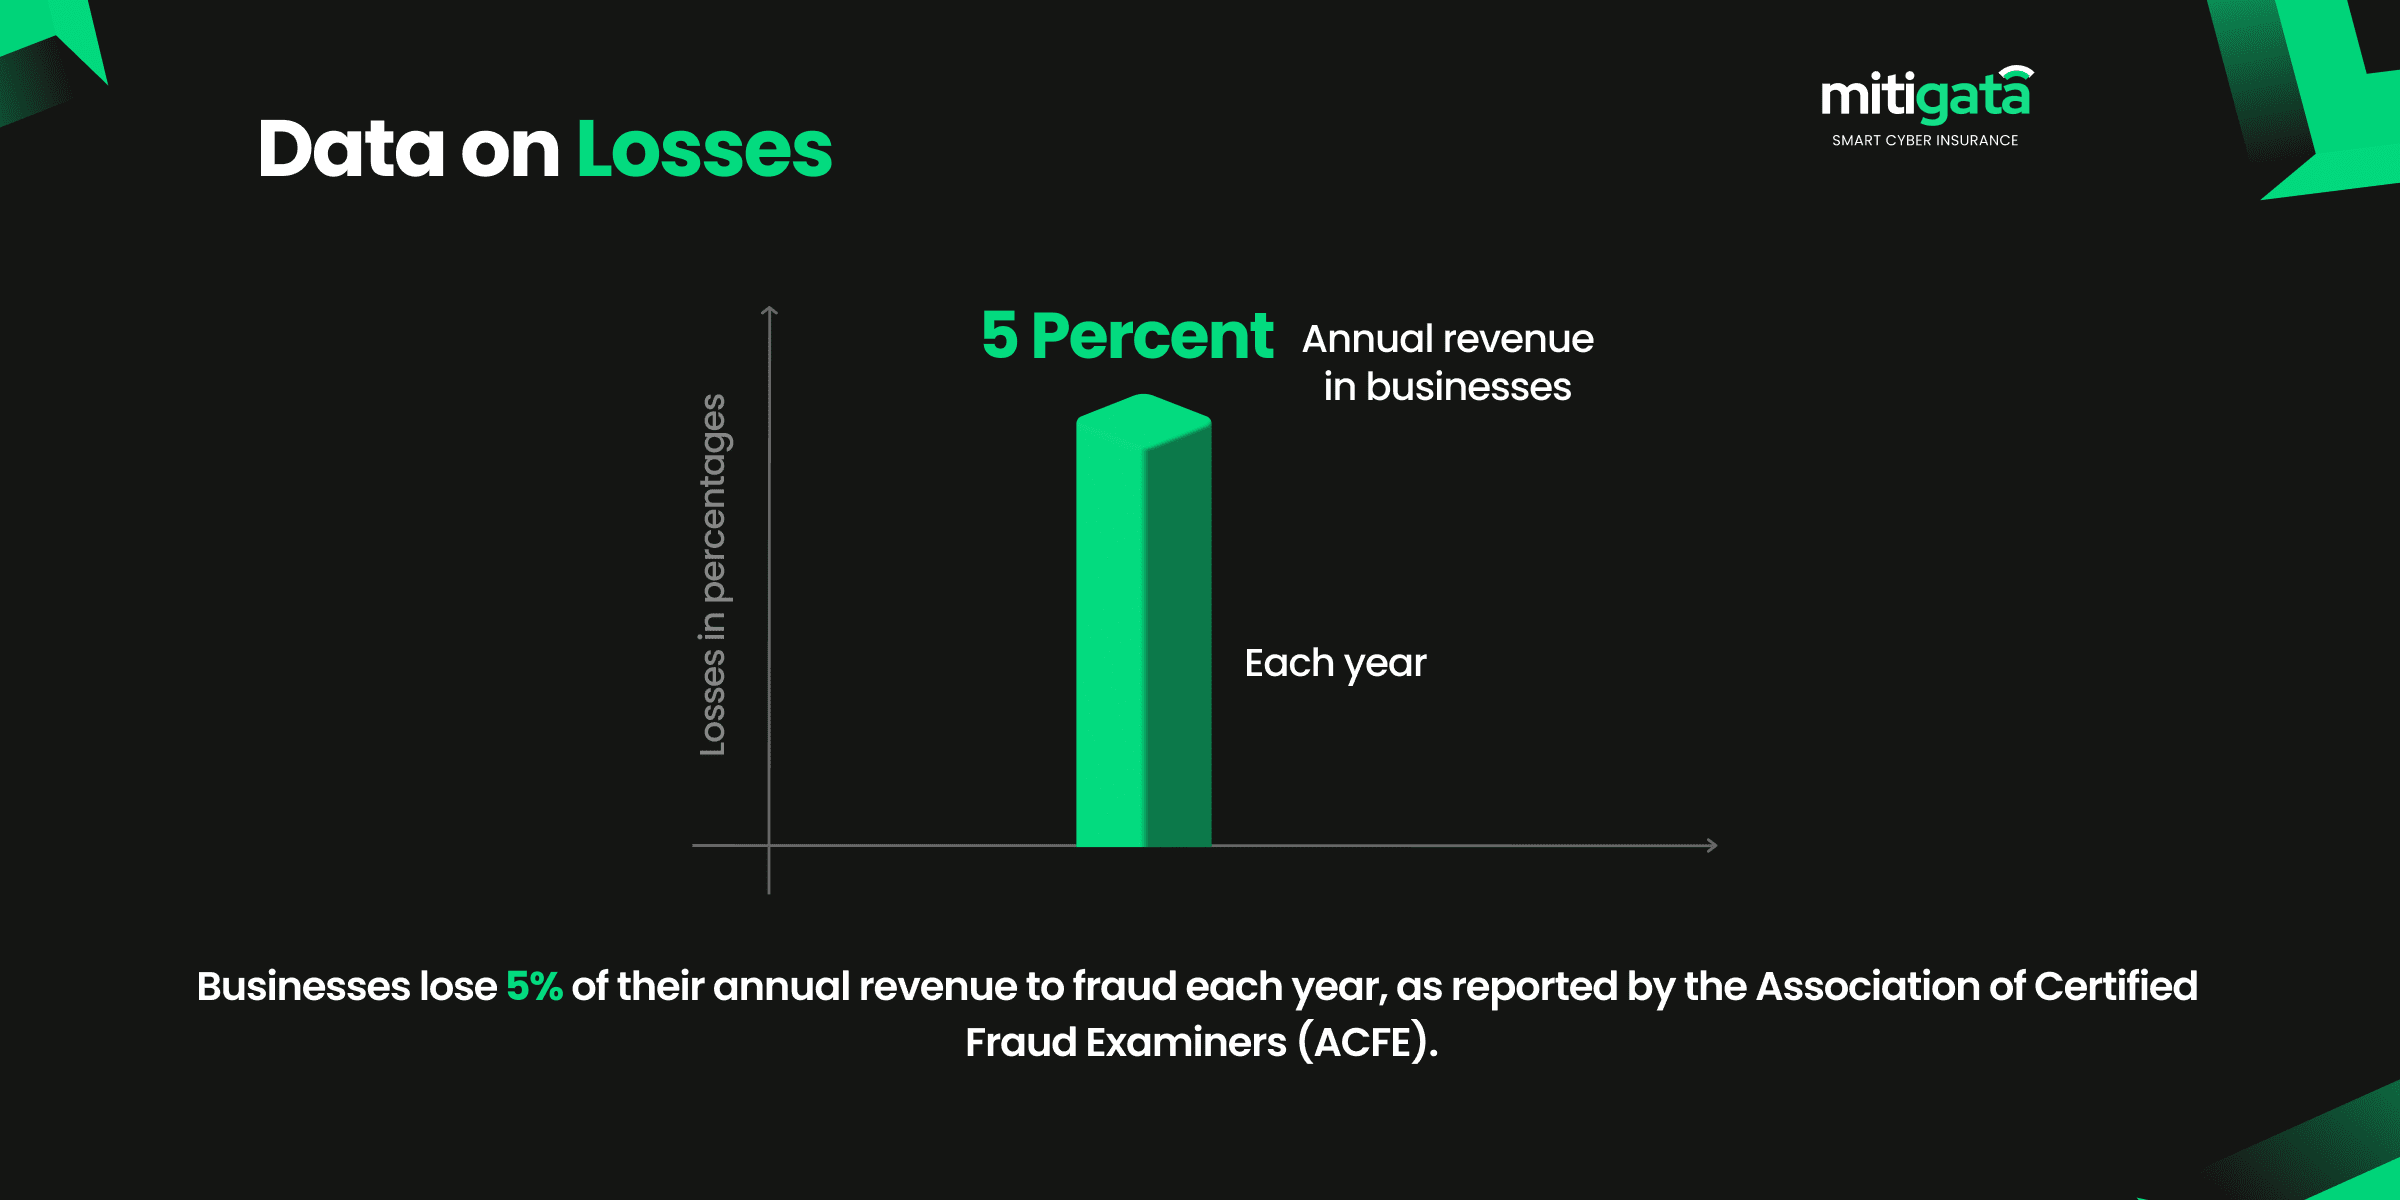 Cyber Data on losses